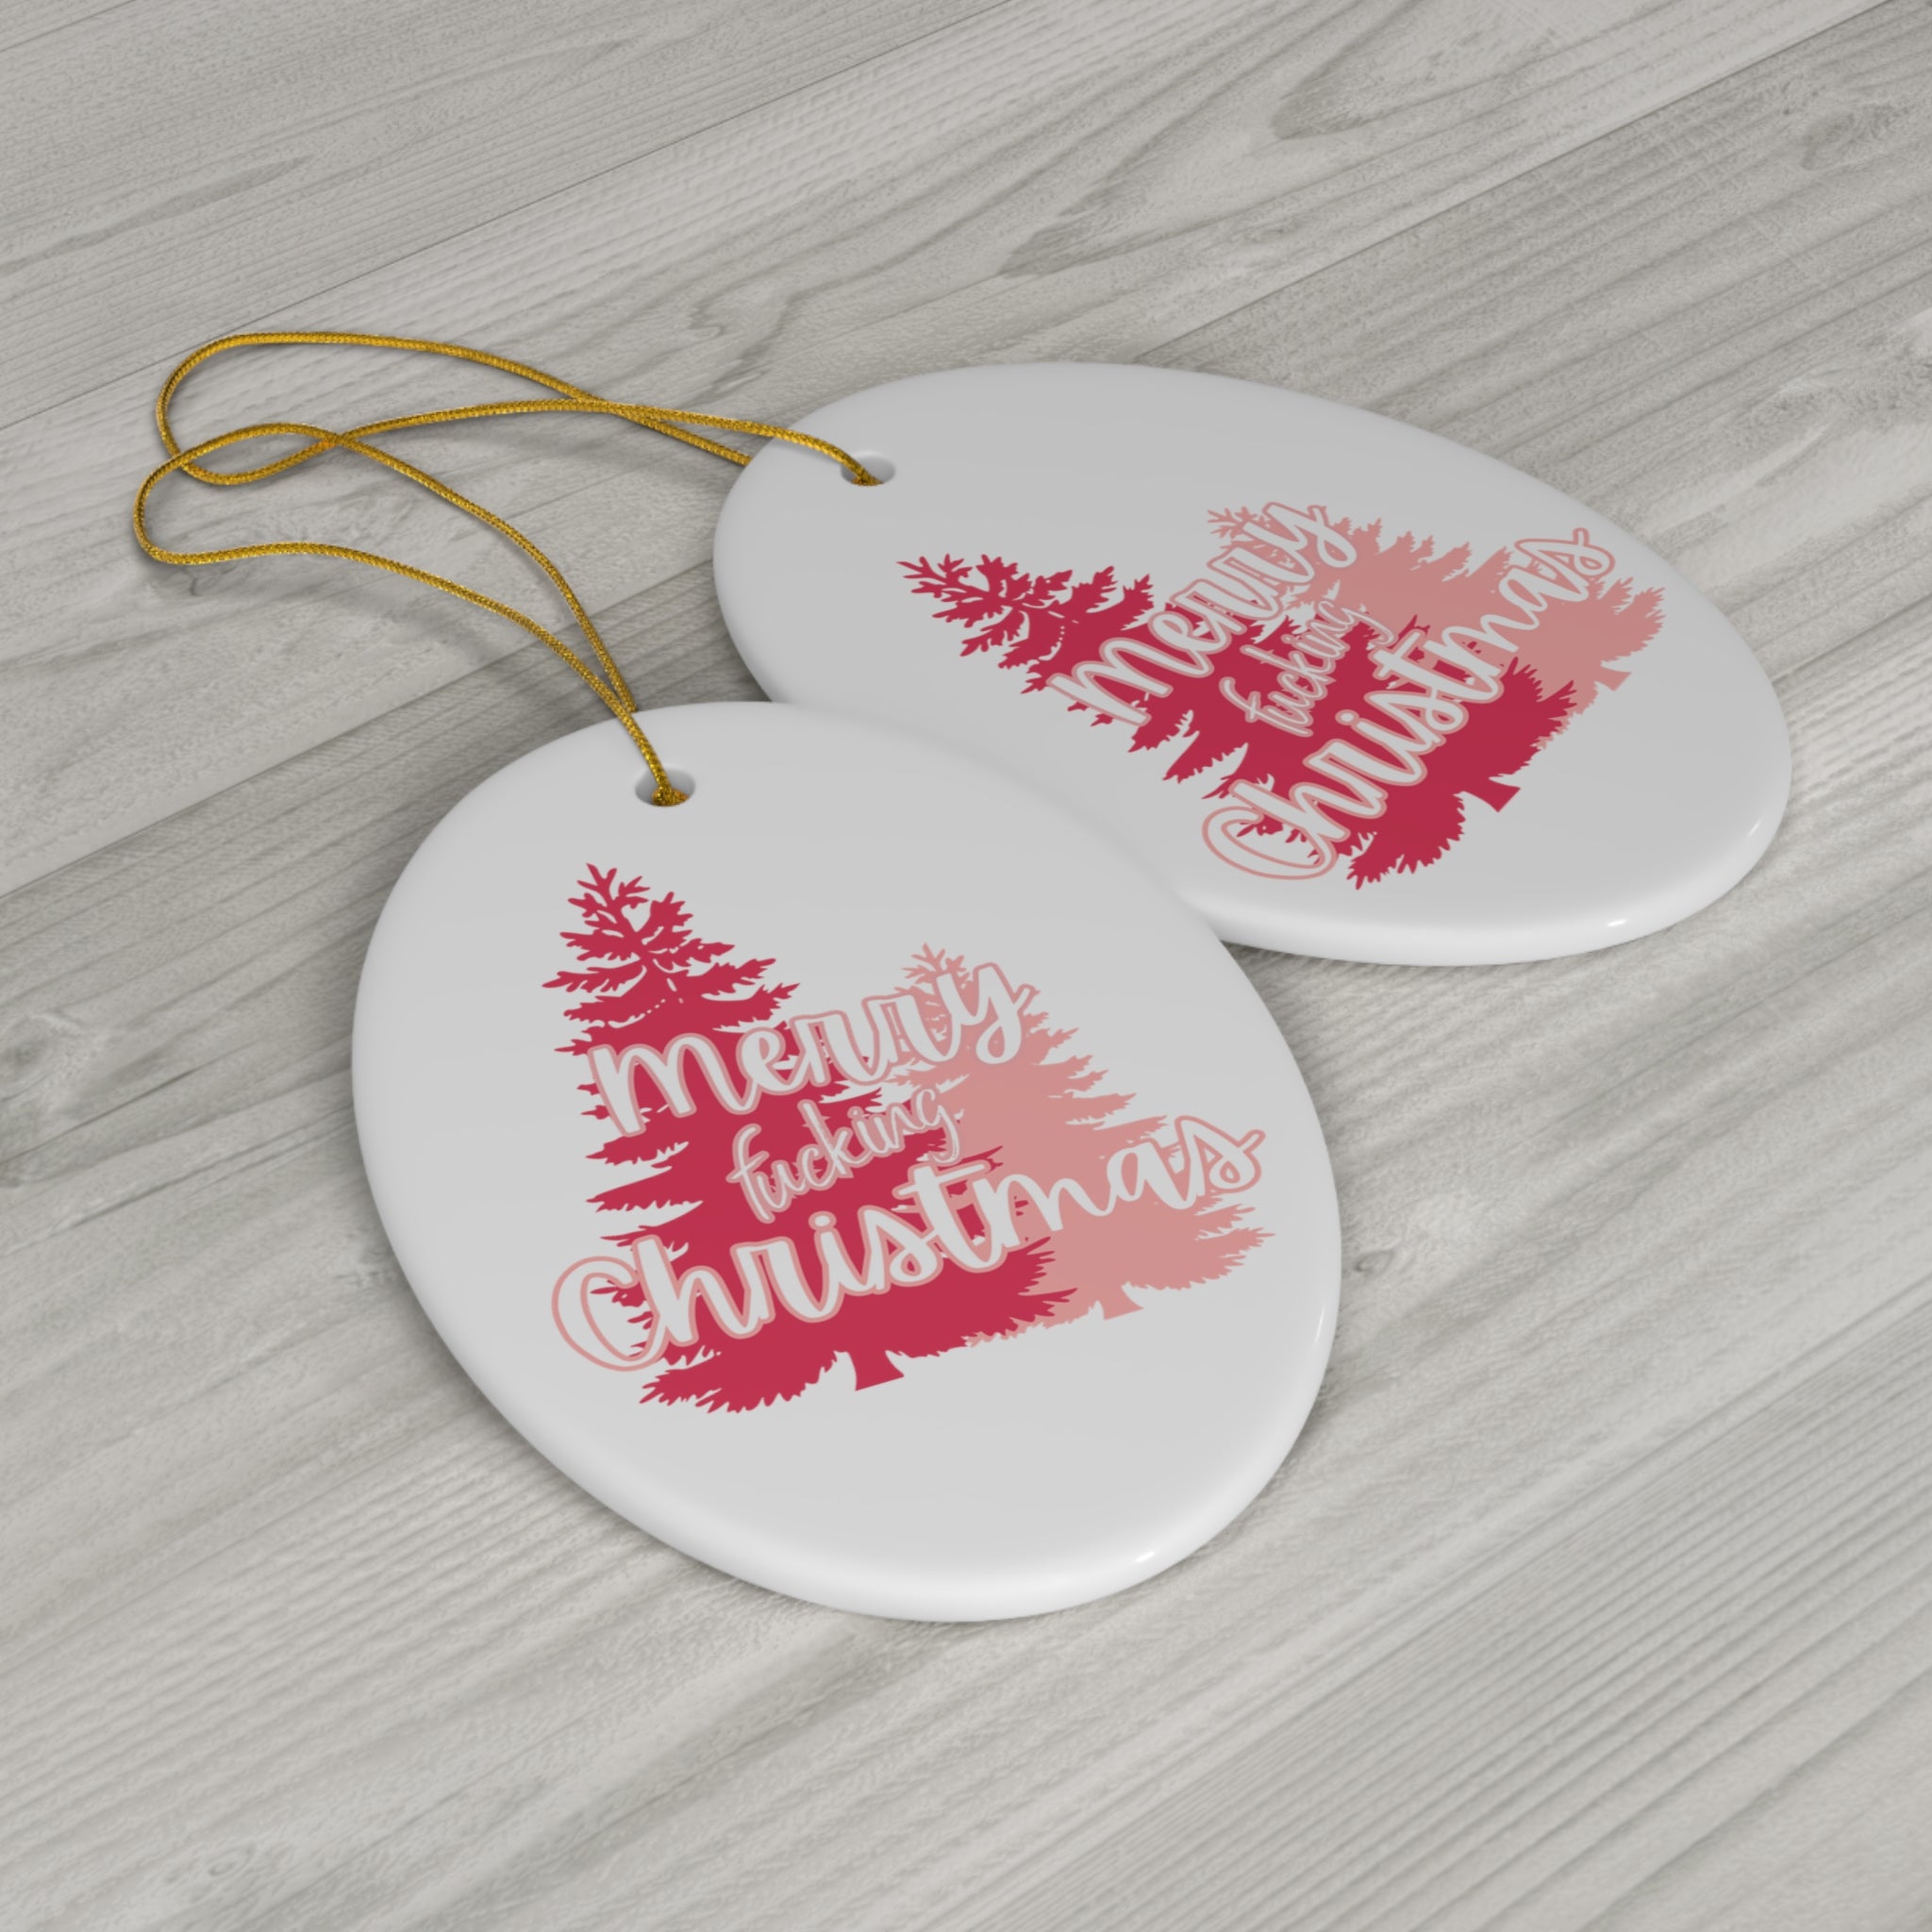  Merry Fucking Christmas (Pink Trees) Ceramic Ornament, Sweary Christmas Ornament, Funny Porcelain Decoration, Holiday Decor Home Decor